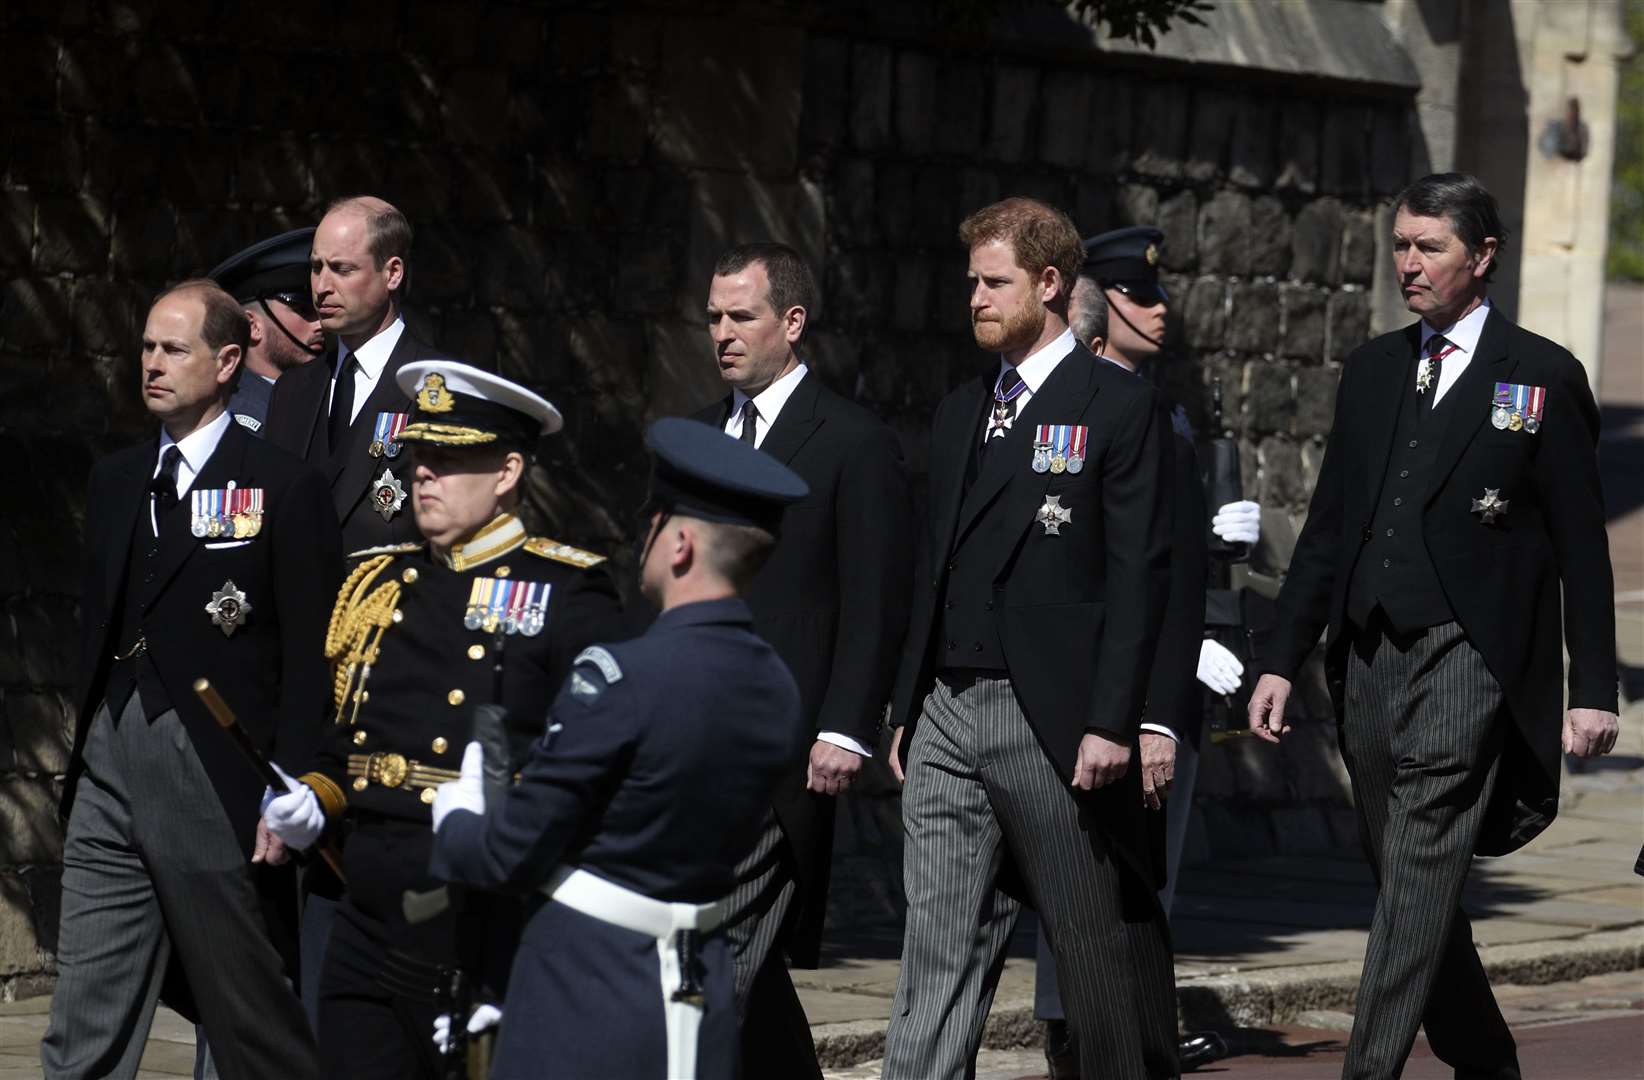 The Earl of Wessex, William, Peter Phillips, the Duke of Sussex, walking in the procession to St George’s Chapel, Windsor Castle, Berkshire, for the funeral of the Duke of Edinburgh (Steve Parsons/PA)